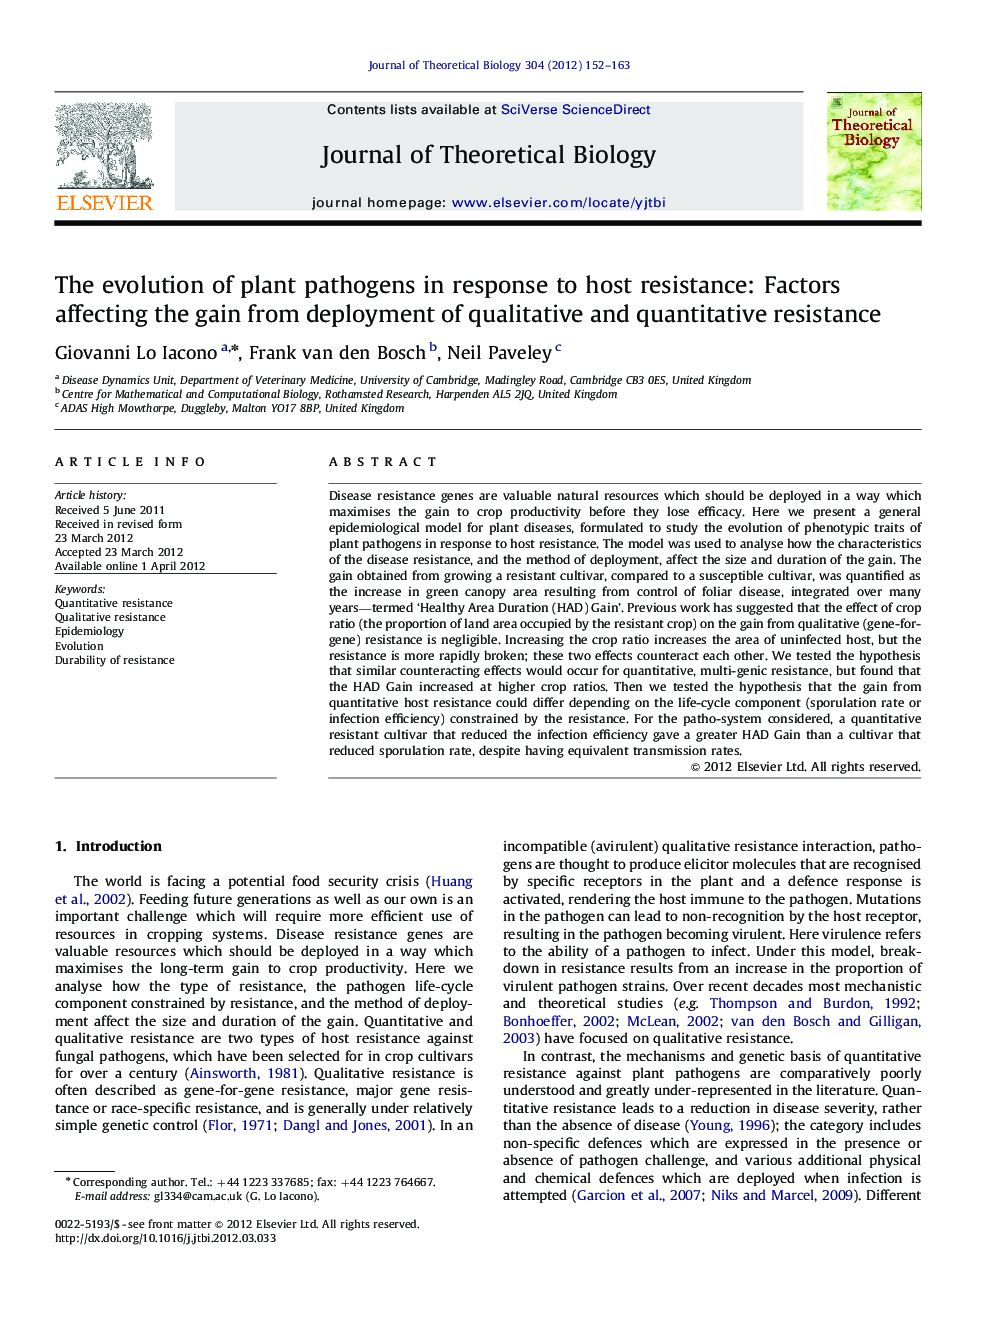 The evolution of plant pathogens in response to host resistance: Factors affecting the gain from deployment of qualitative and quantitative resistance